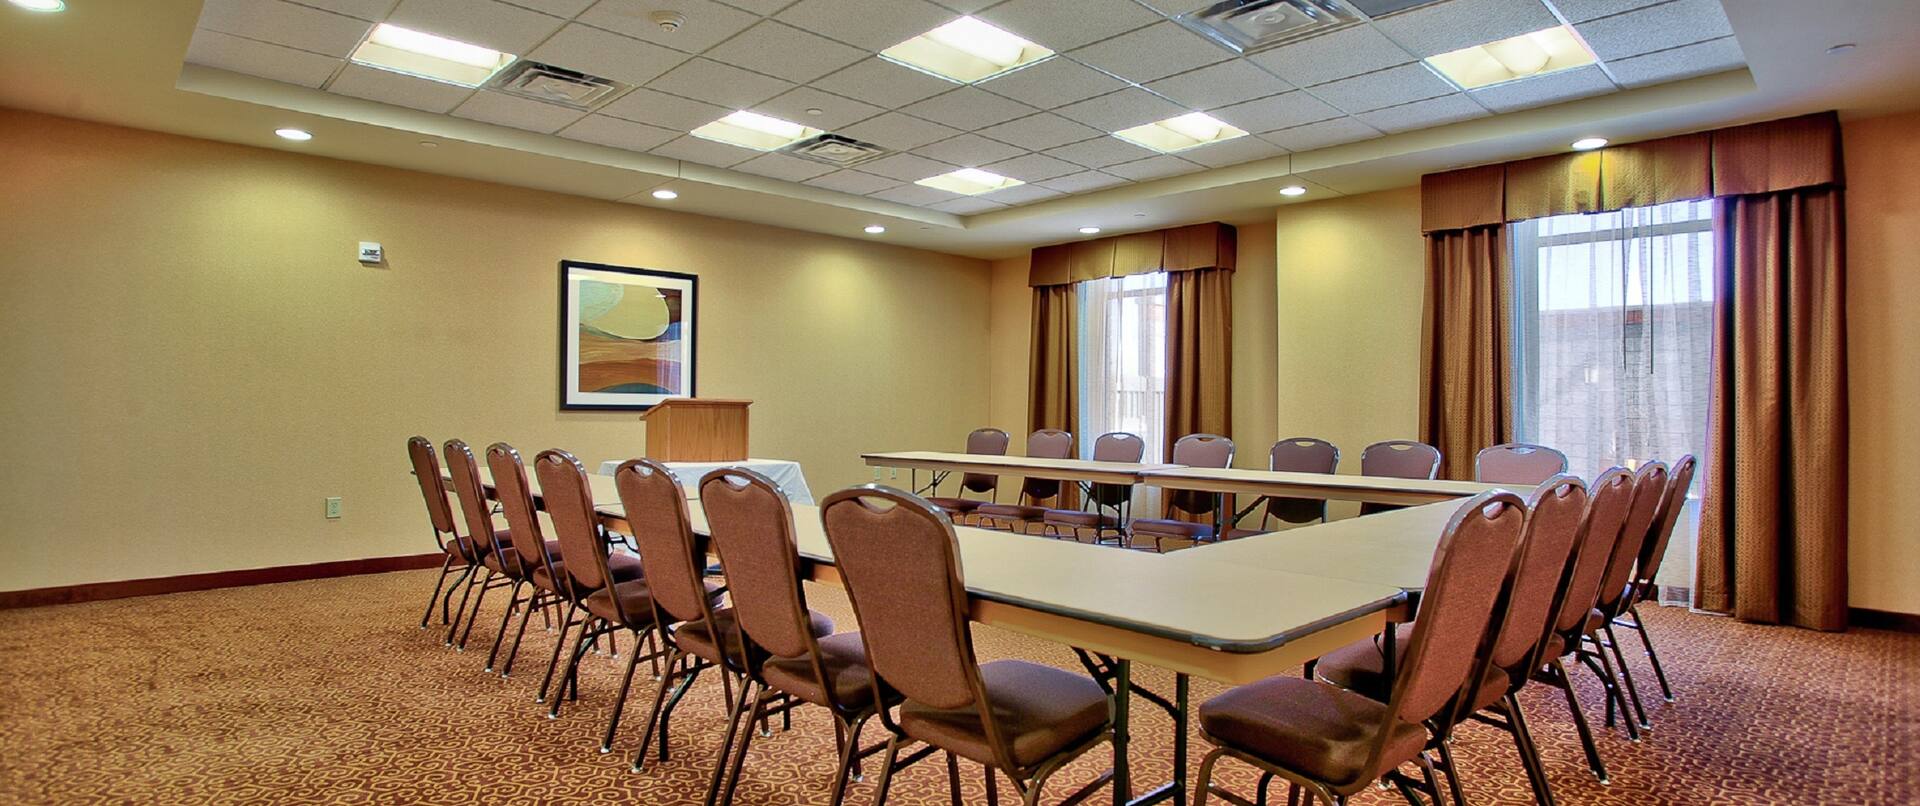 Meeting Room With U-Shaped Table and Chairs